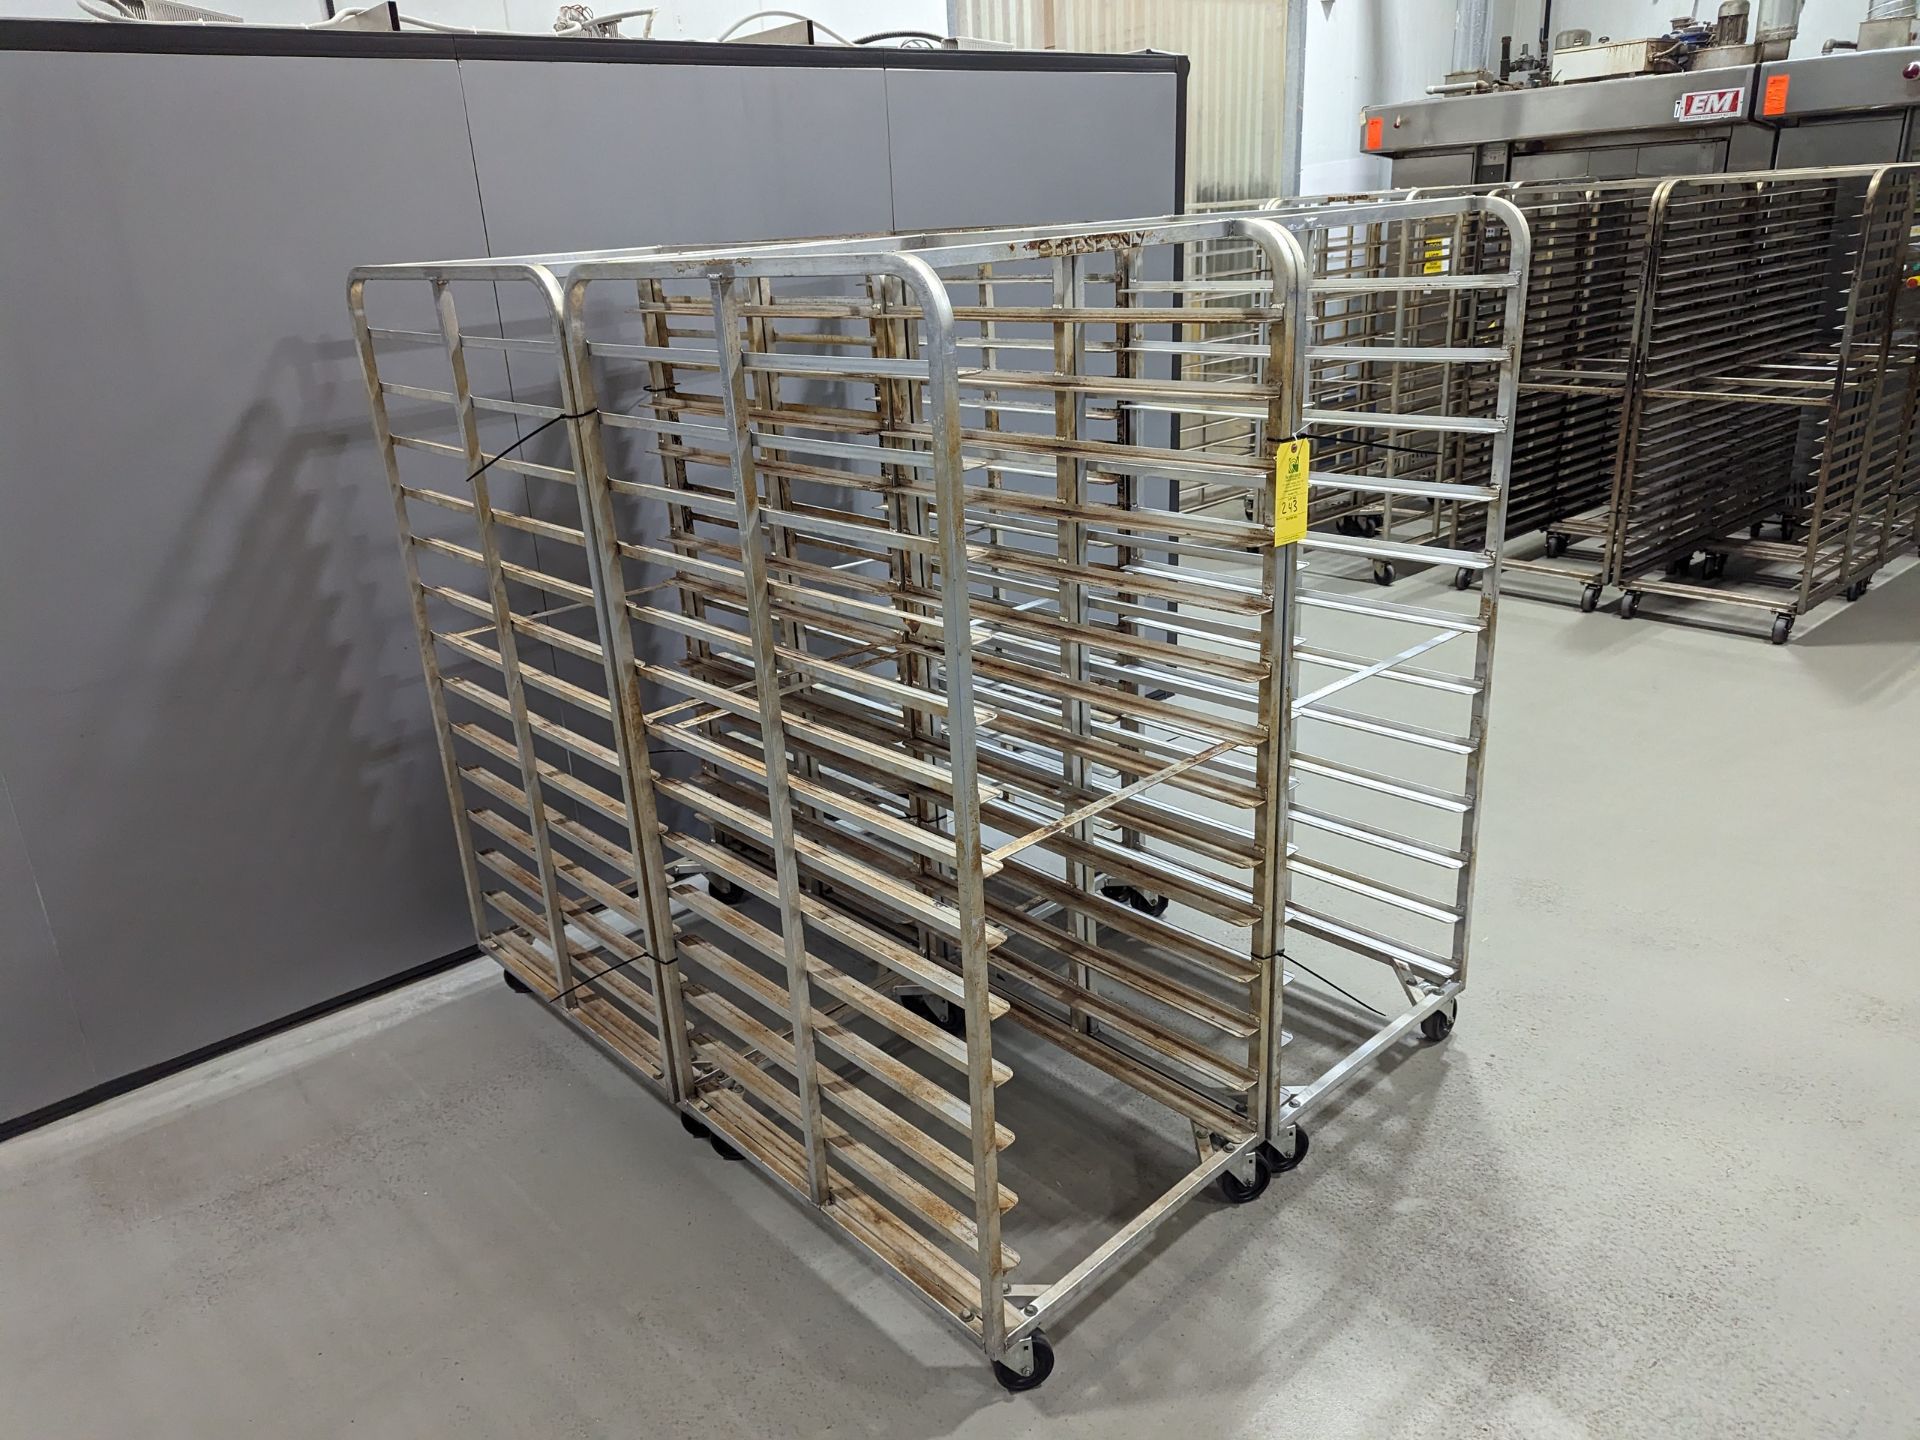 Lot of 4 Double Wide Aluminum Bakery Racks, Dimensions LxWxH: 72x57x69 Measurements are for lot of - Image 3 of 6